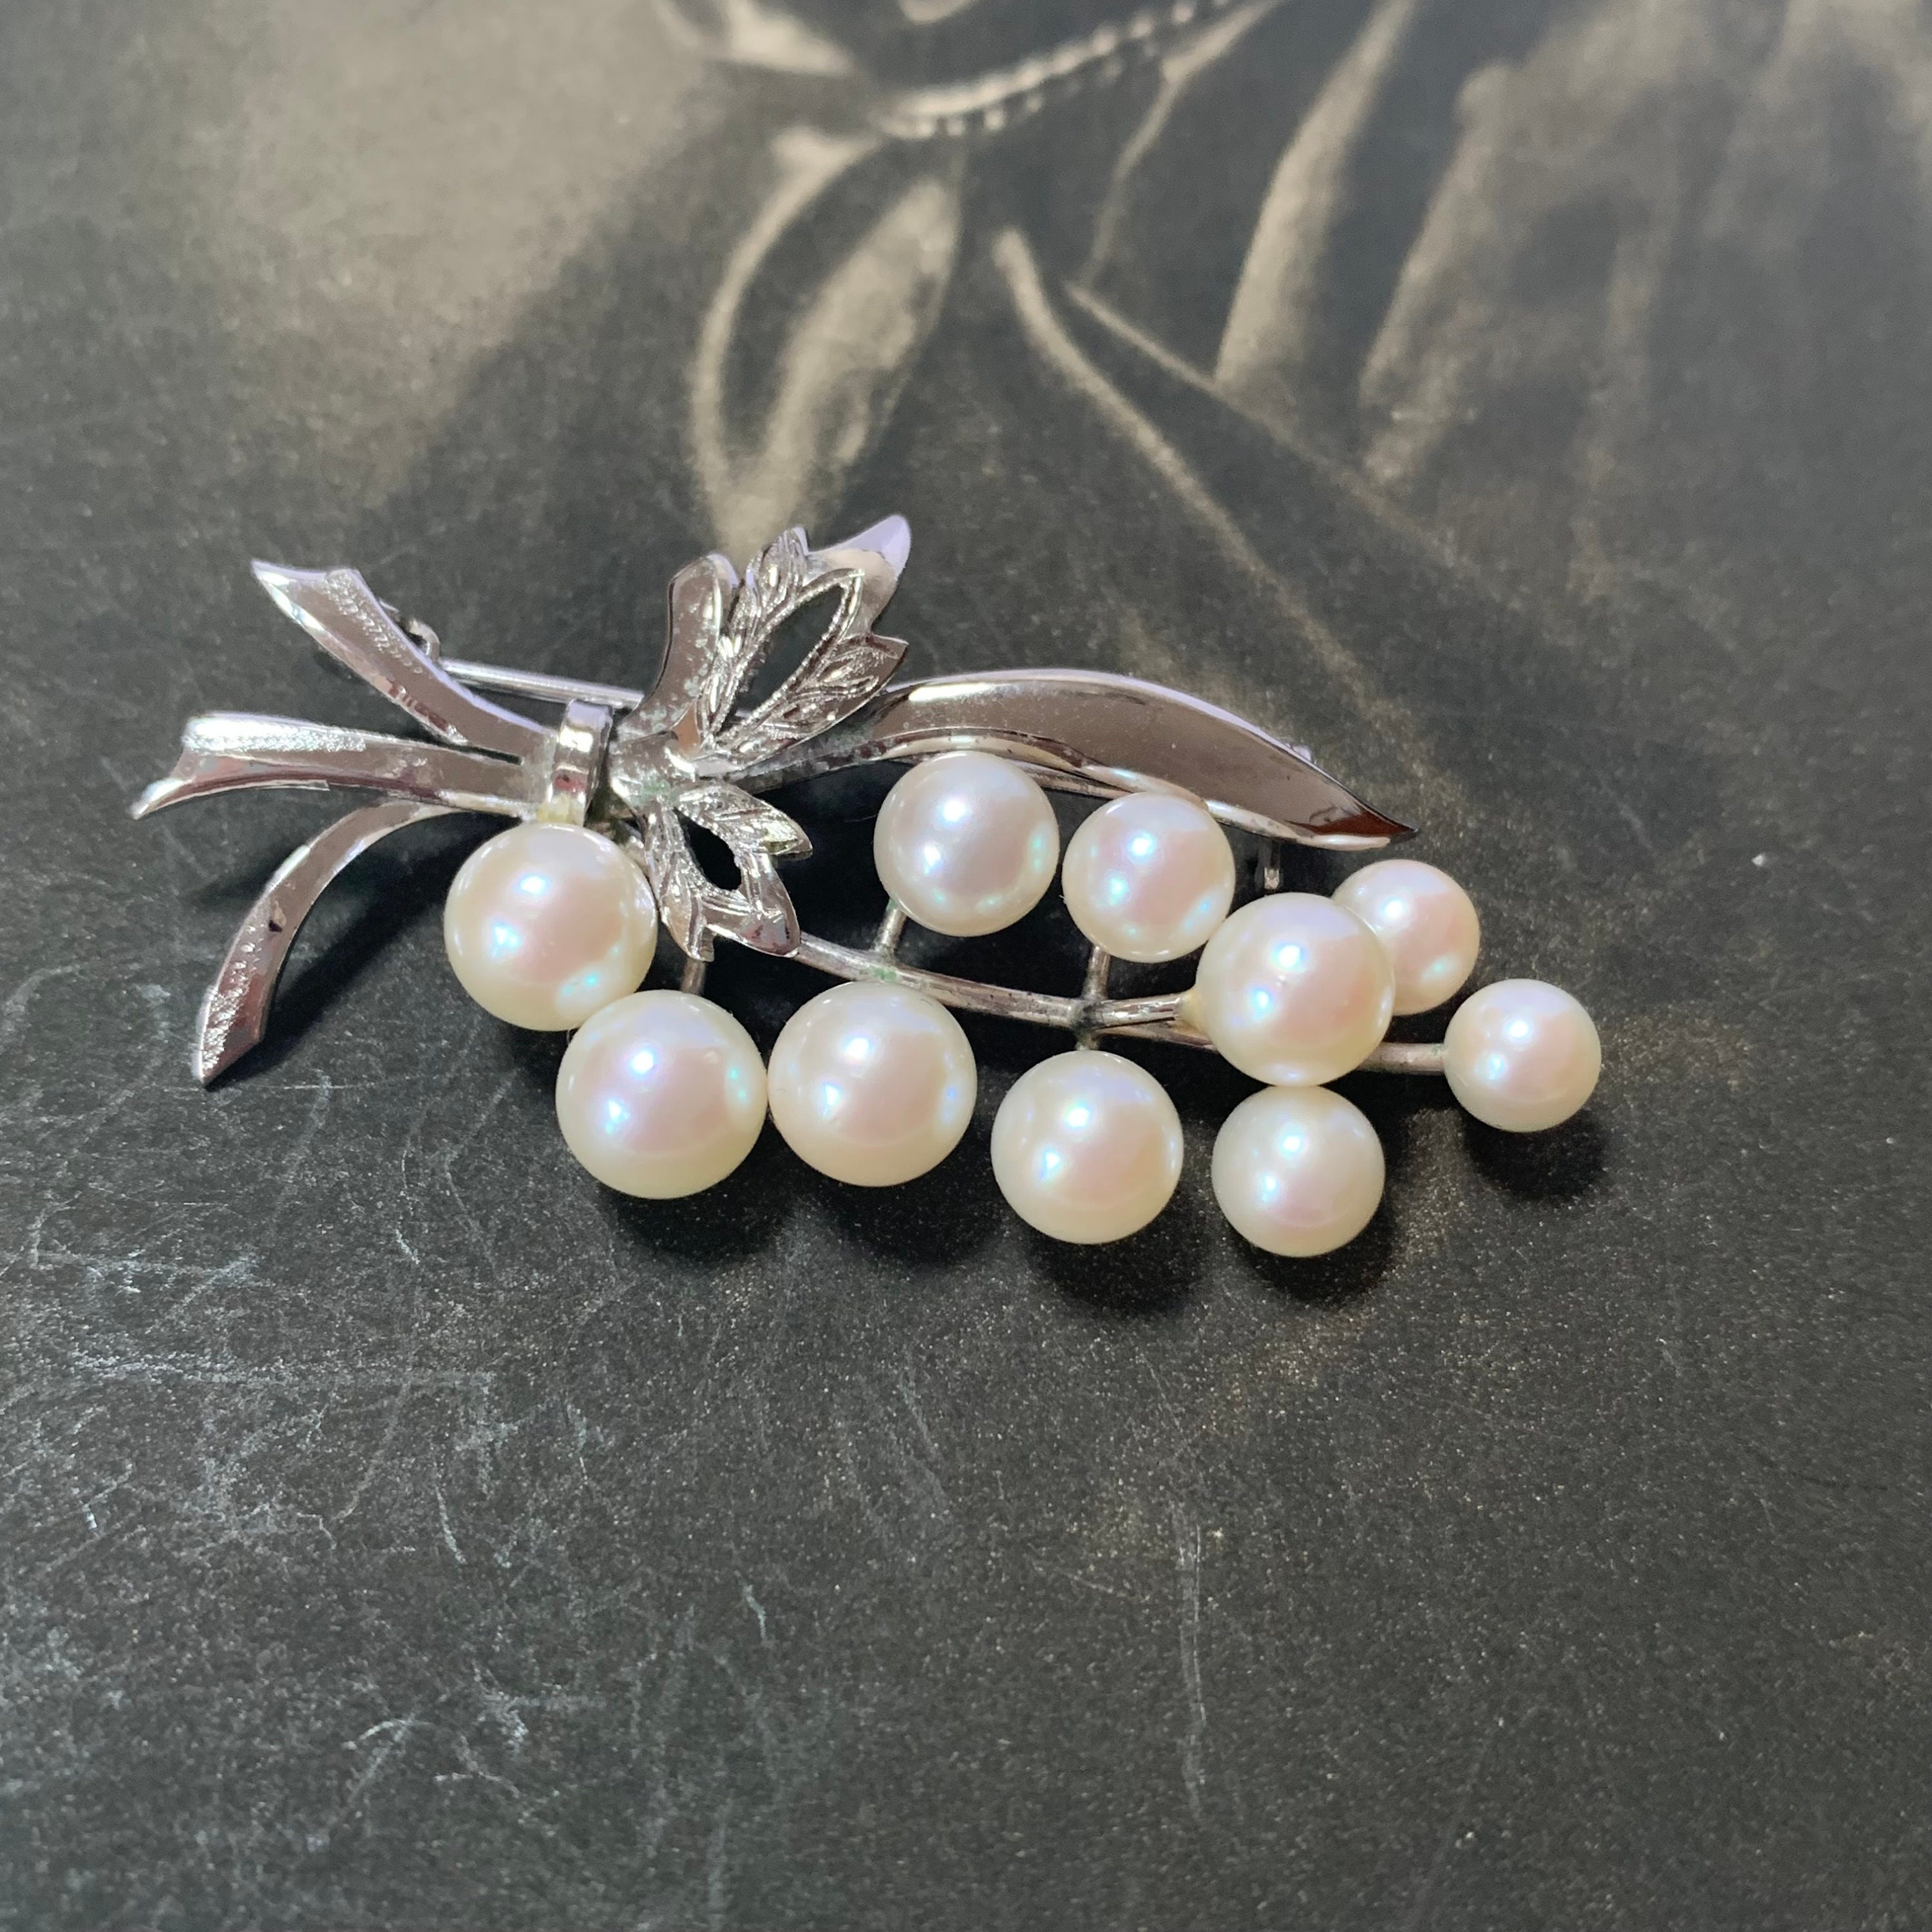 Pearl Brooch Set in Silver The Style Of Mikimoto & Featuring High Quality Pearls. Beautiful Vintage Piece Stunning Condition